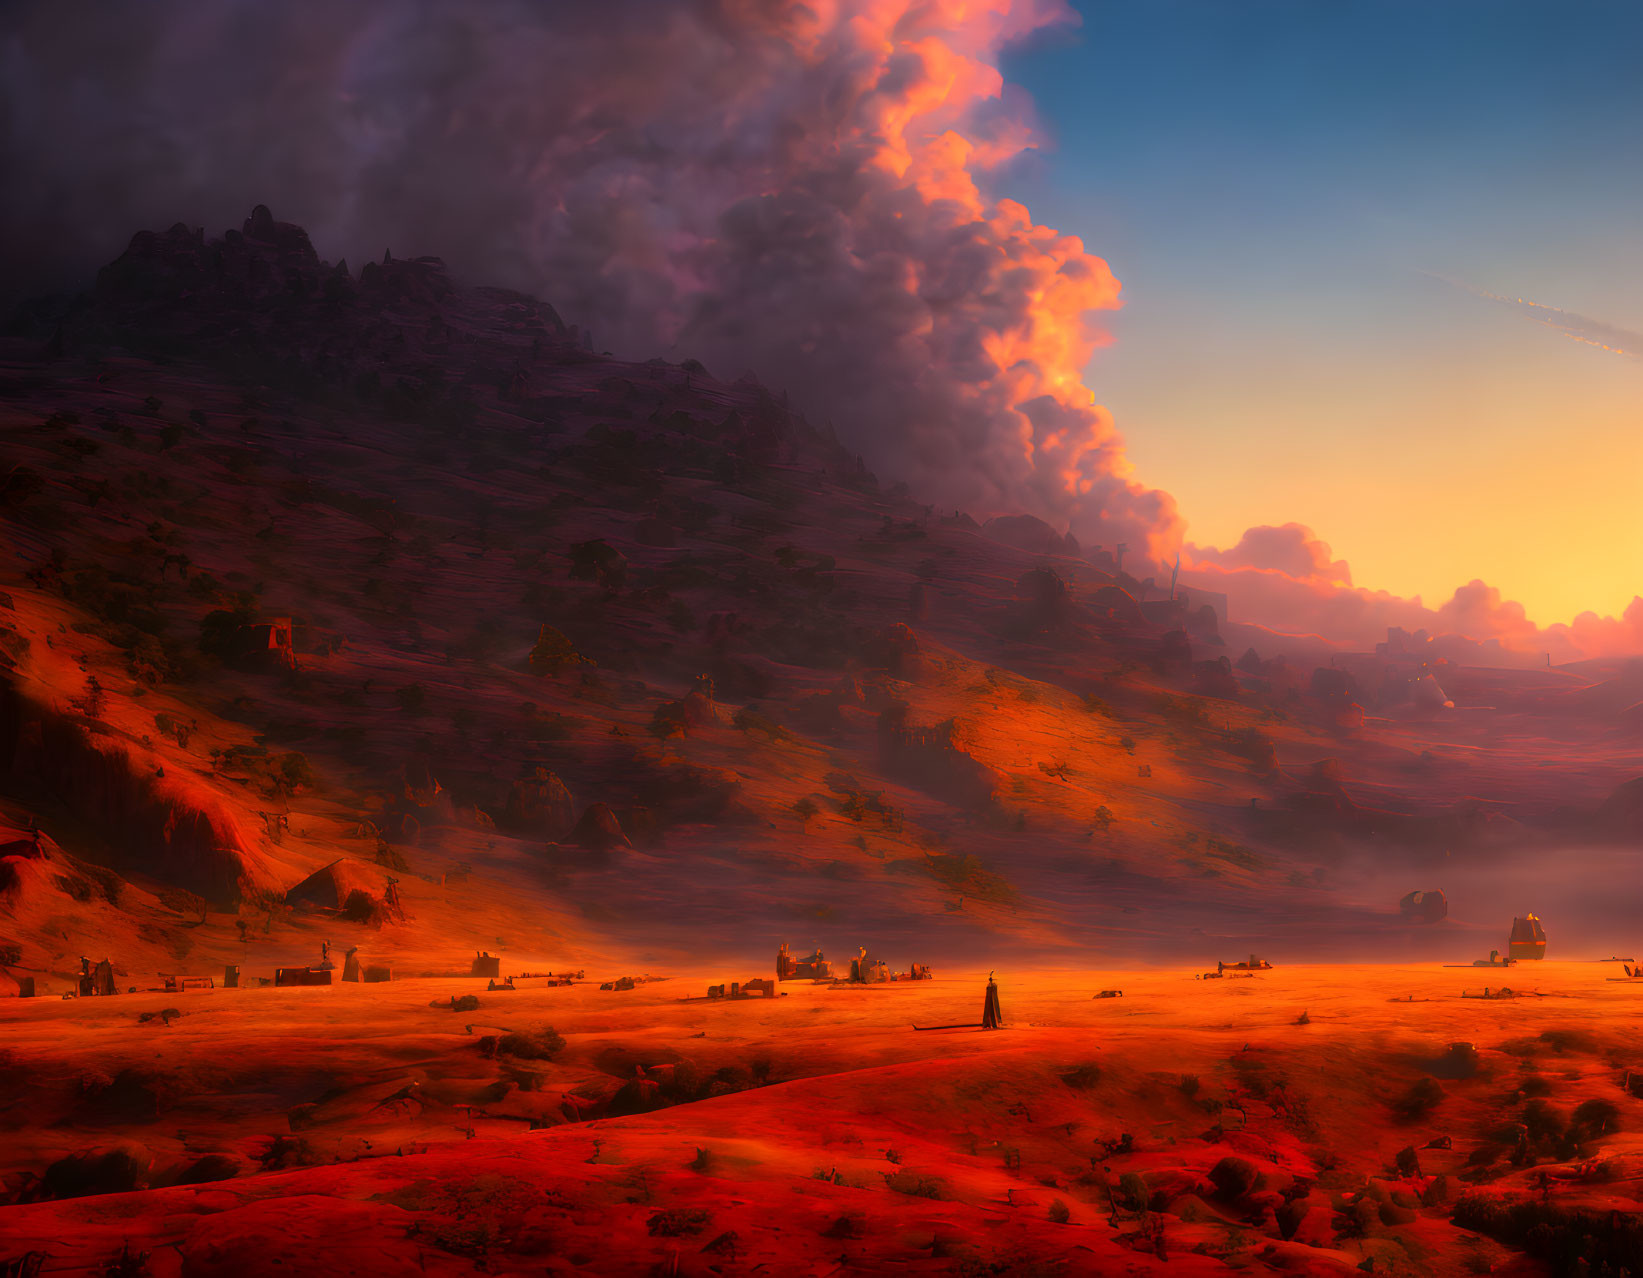 Vivid landscape with fiery sky, rocky terrain, figures, and volcanic structures at dusk or dawn